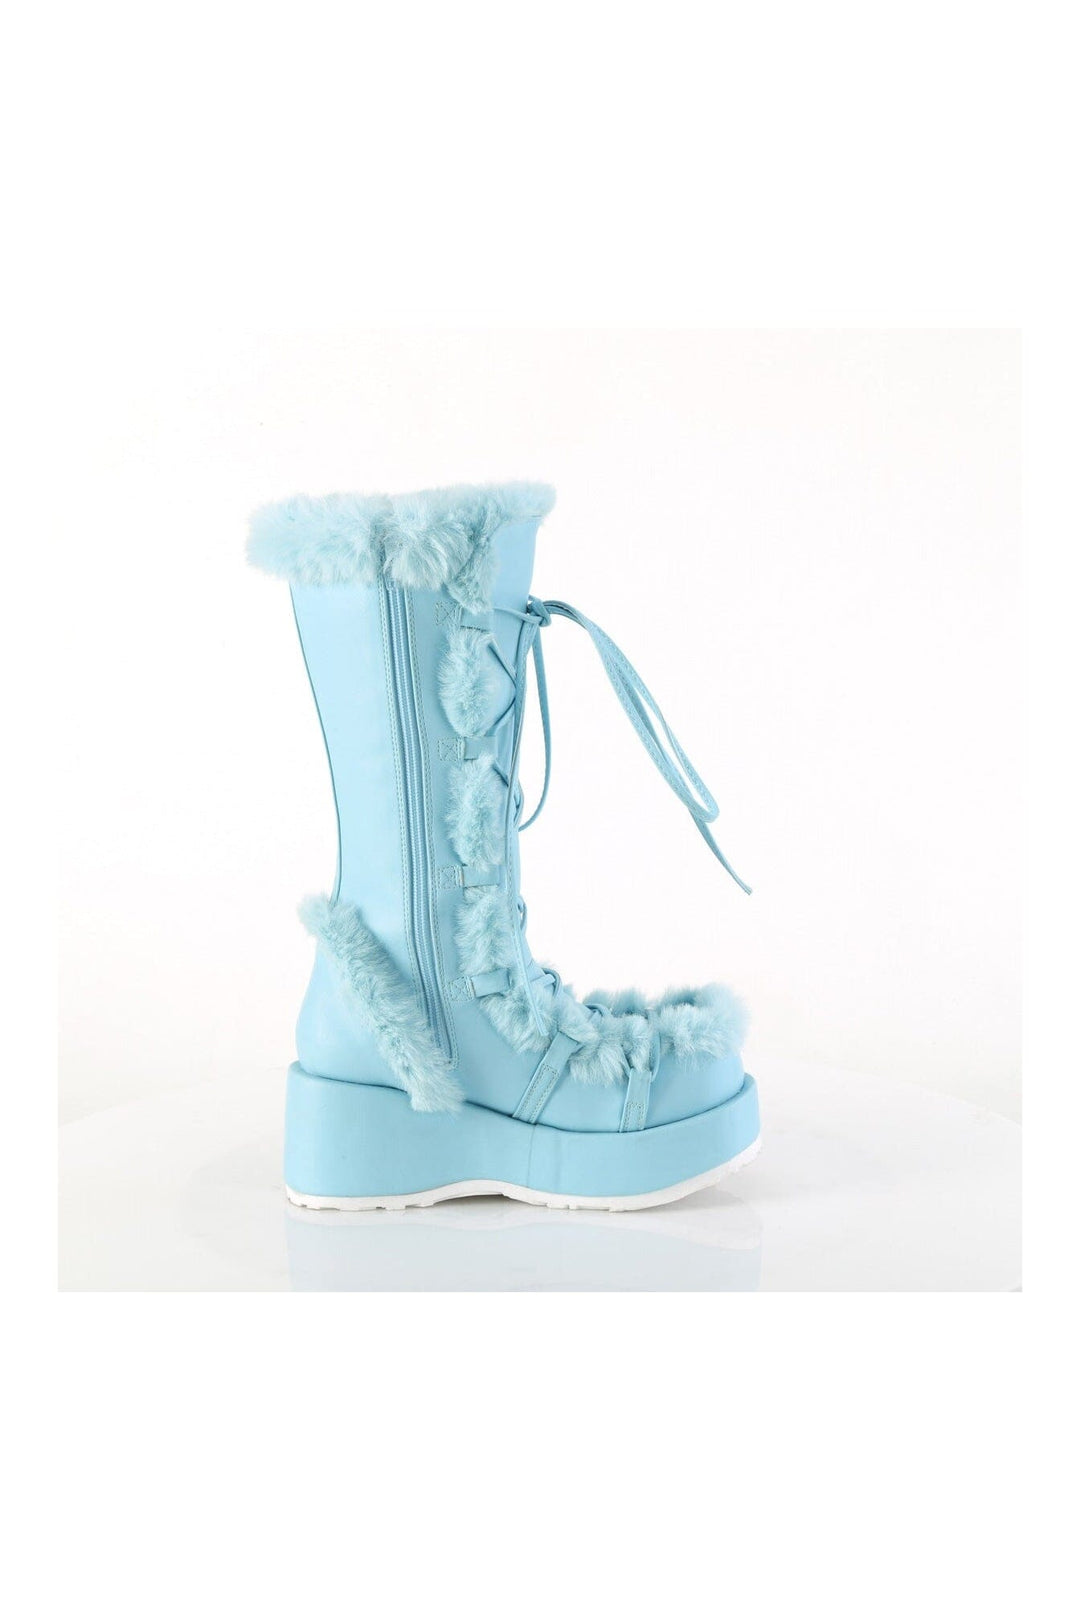 CUBBY-311 Blue Vegan Leather Knee Boot-Knee Boots-Demonia-SEXYSHOES.COM